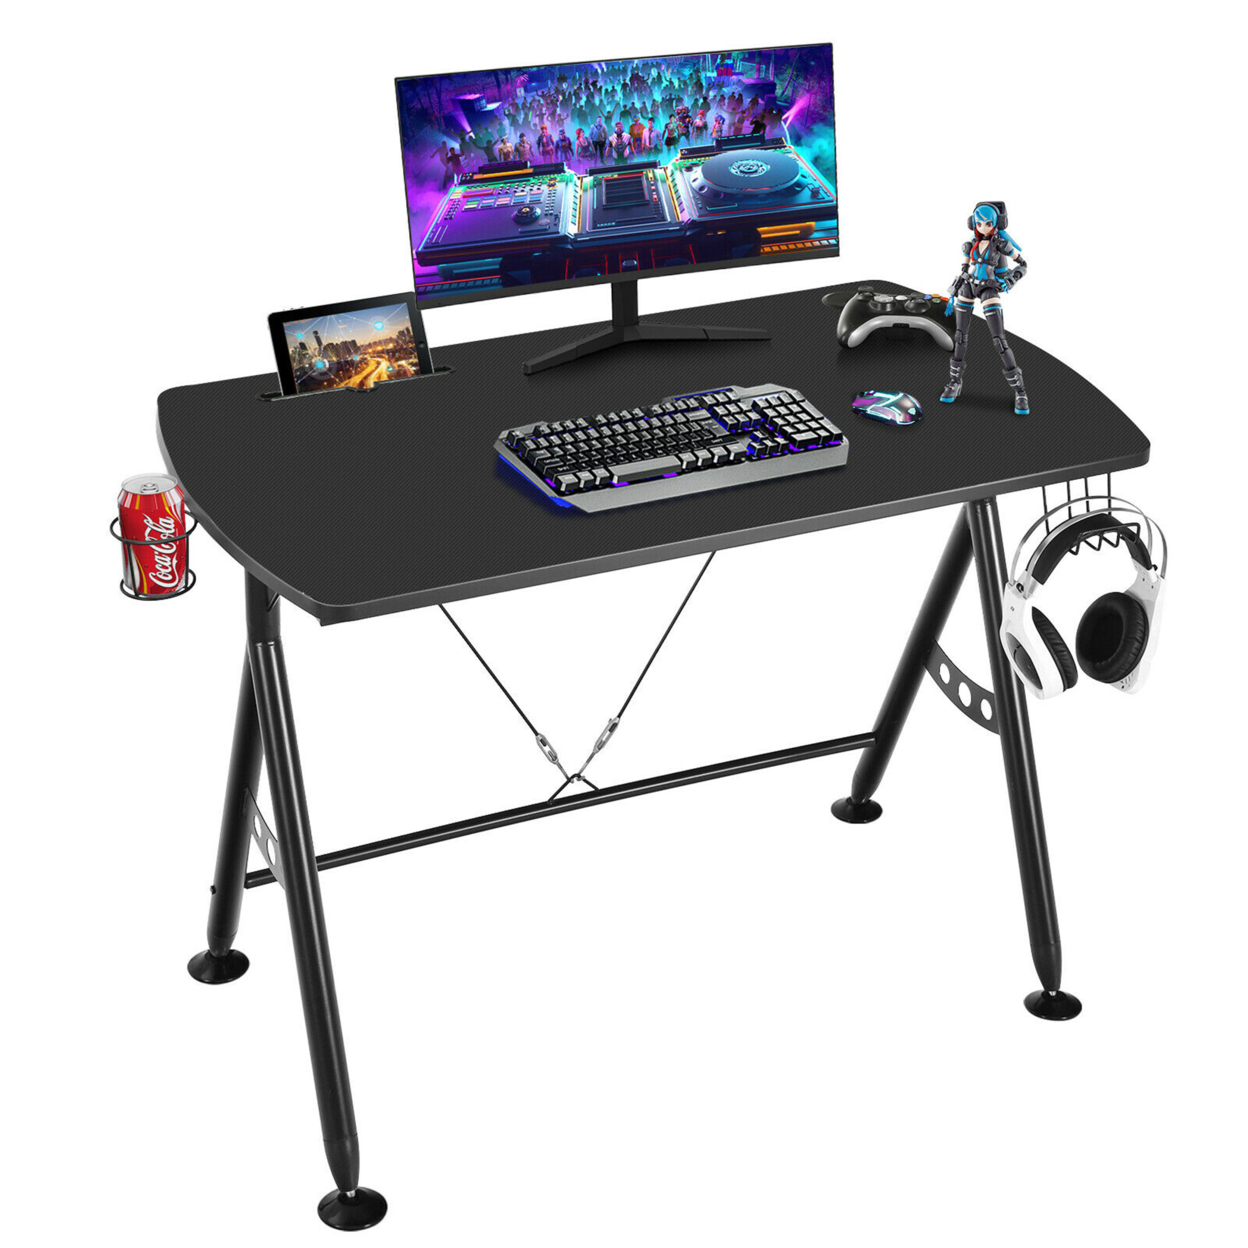 Y-shaped Gaming Desk Home Office Computer Table W/ Phone Slot & Cup Holder